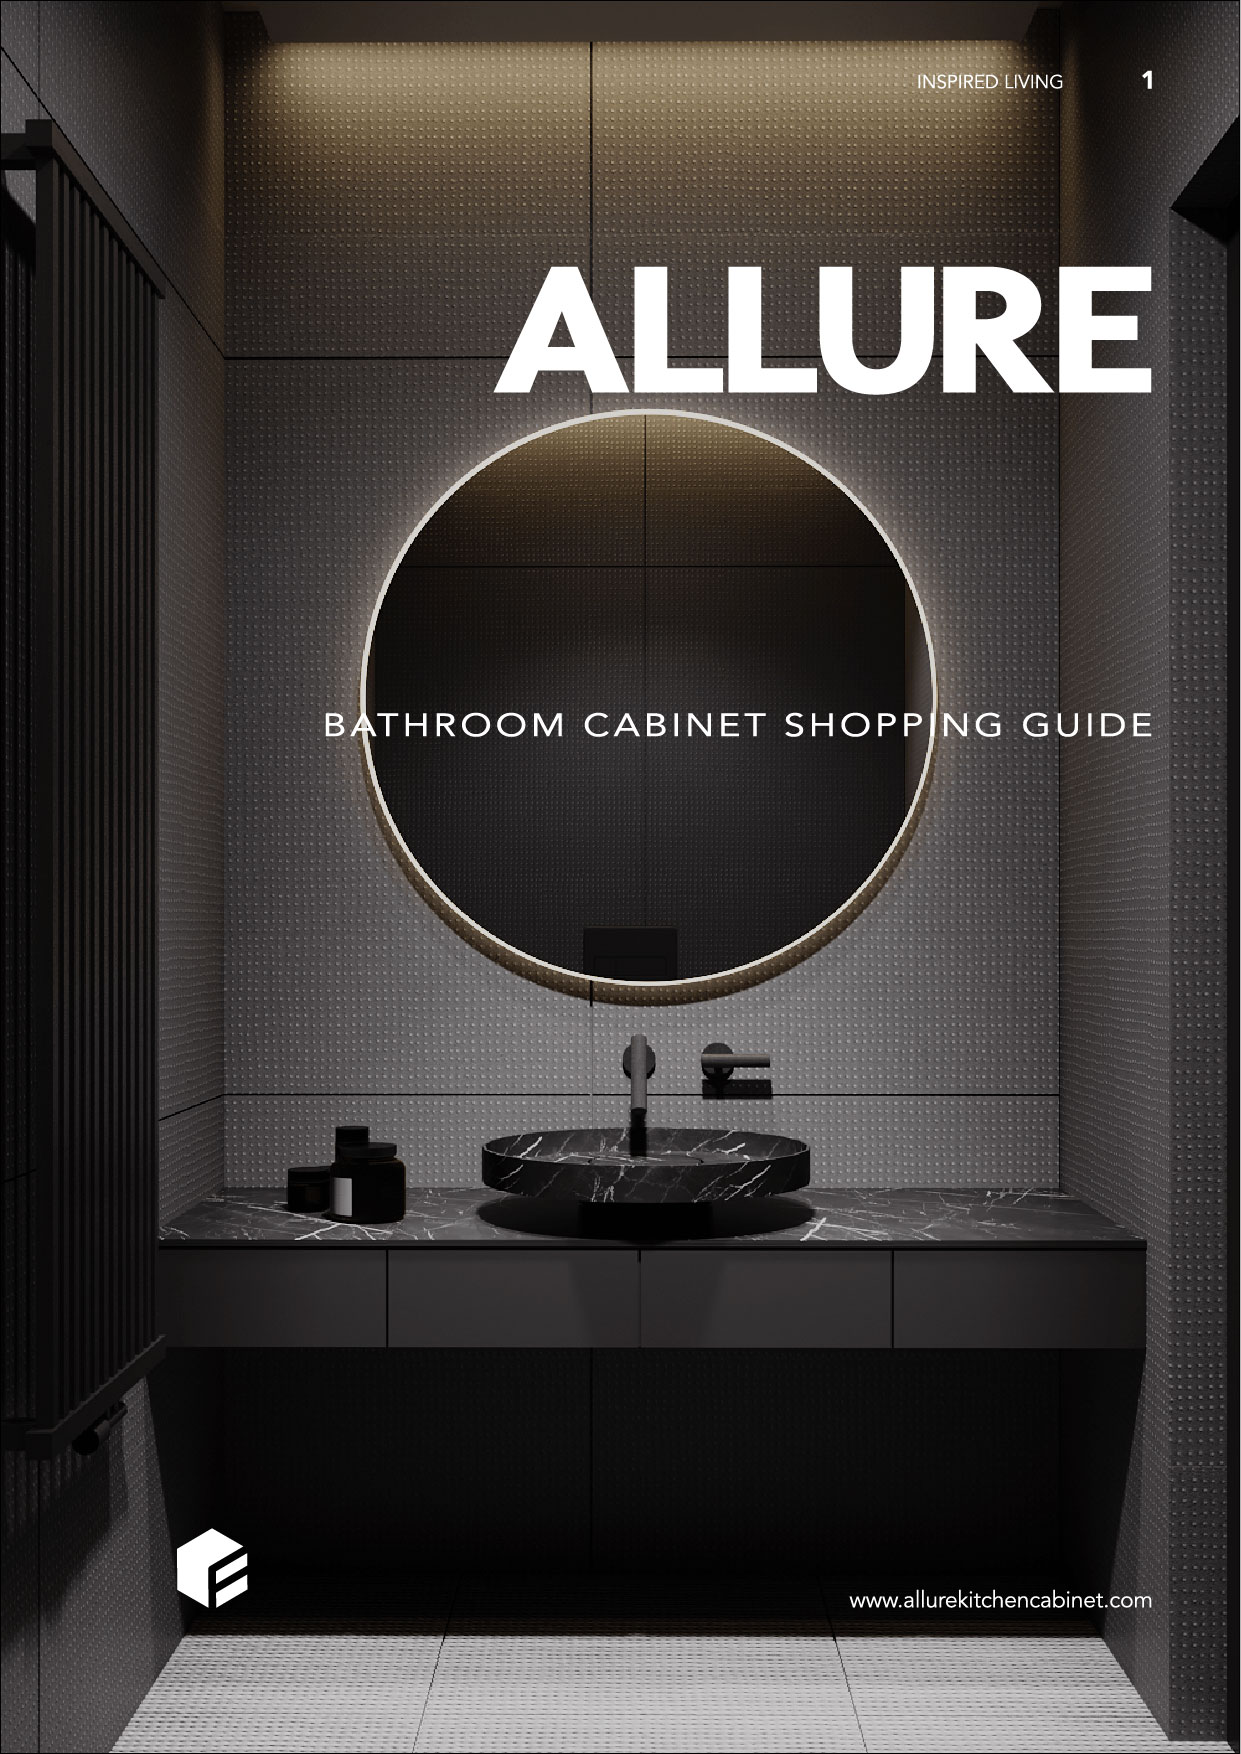 ALLURE Bathroom Cabinet Shopping Guide